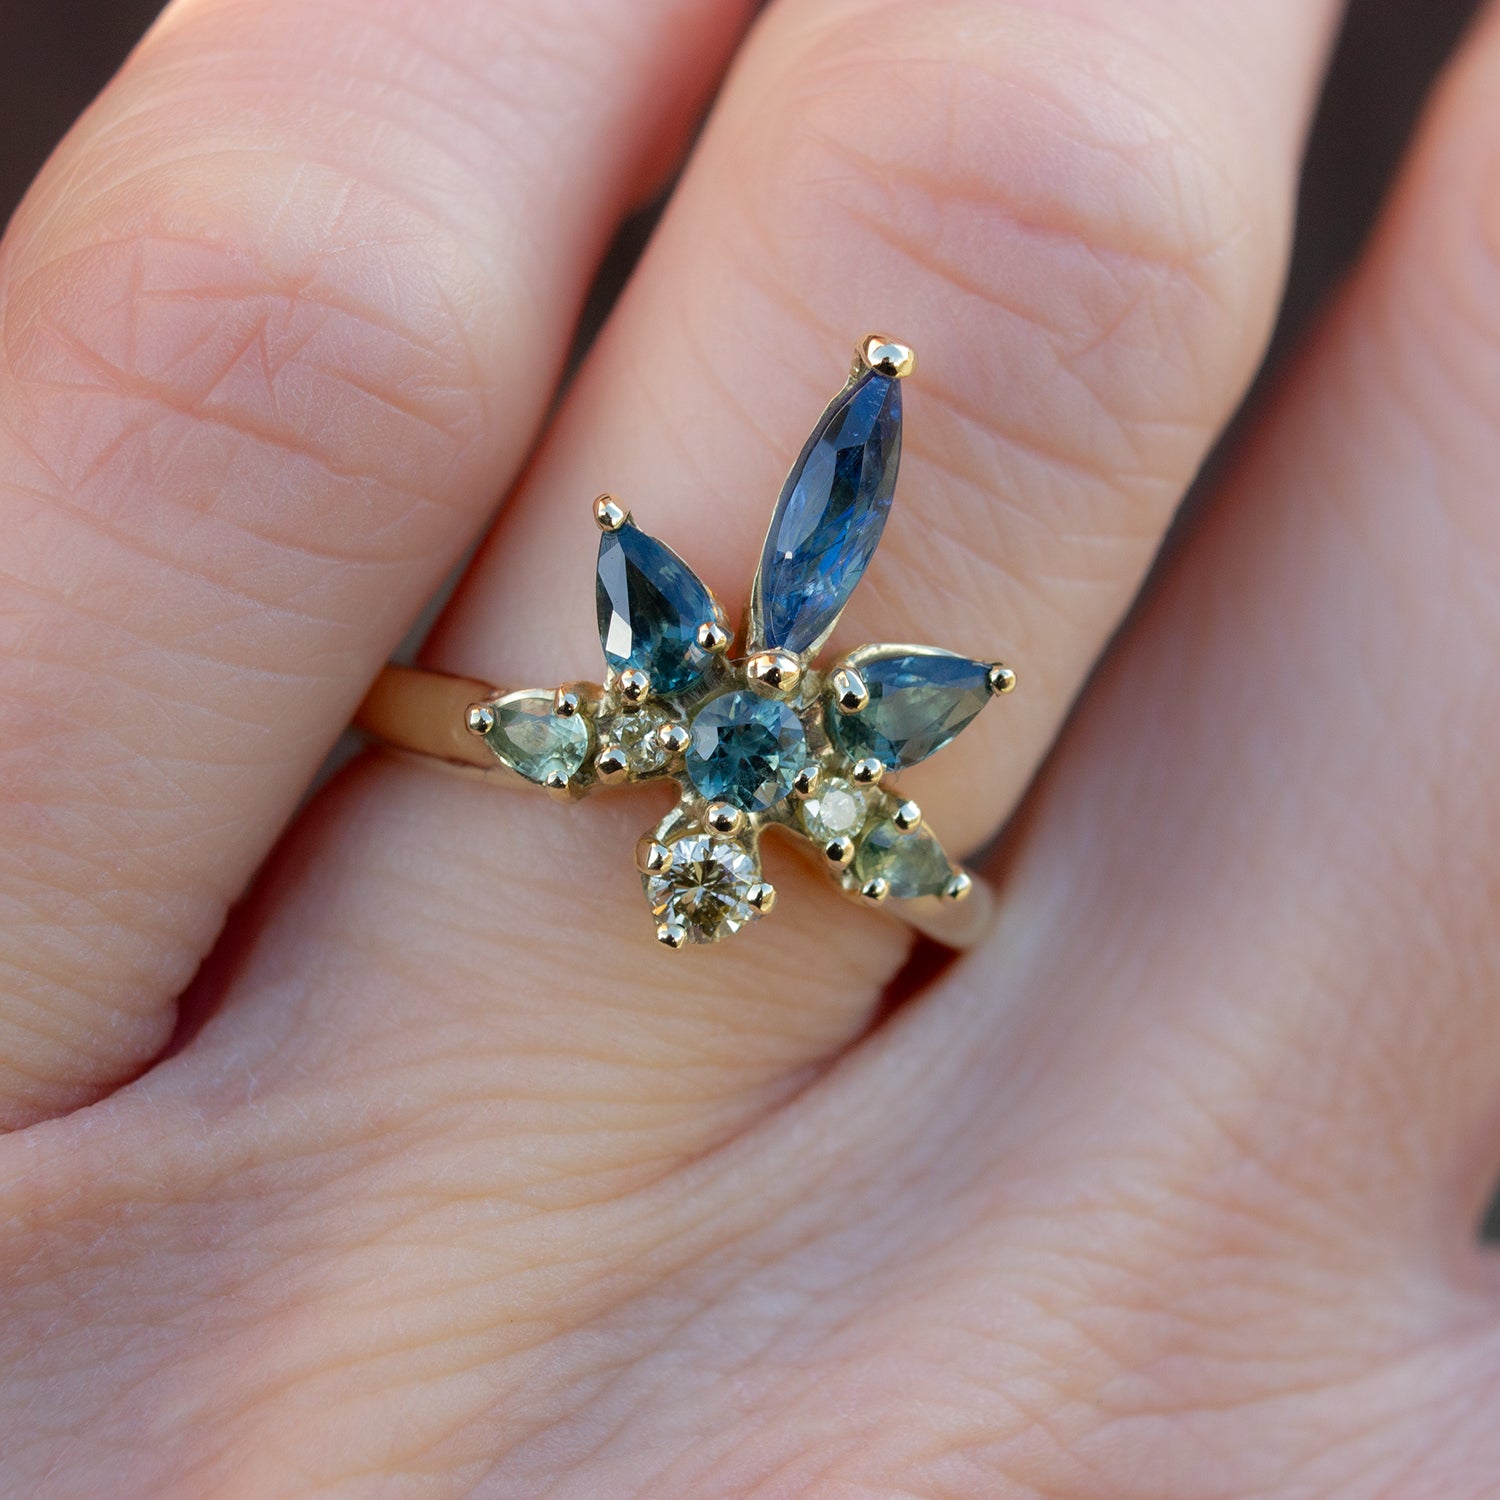 Beautiful coctail ring inspired by water lilies. Featuring blue, teal and green sapphires and yellow diamonds, arranged in the shaped of a flower.